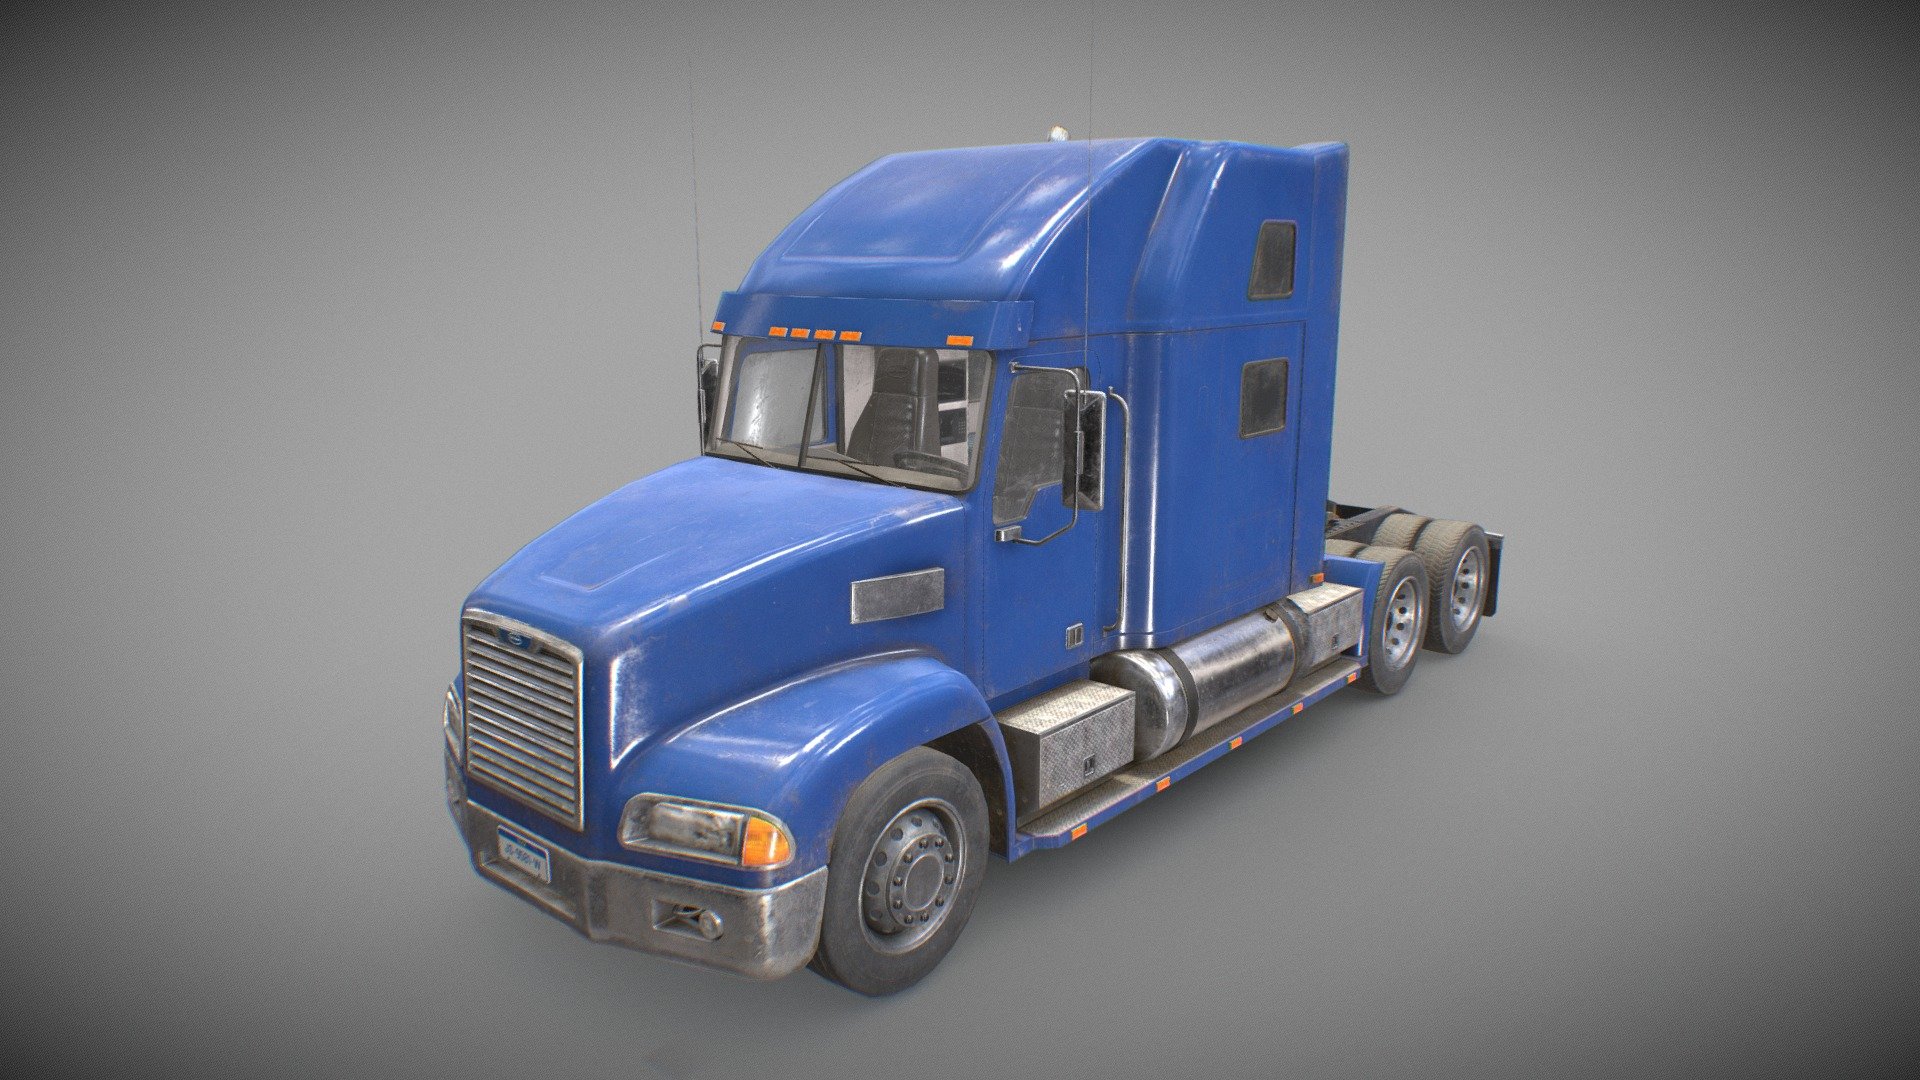 Low Poly 3D model of a Blue Semi Truck Tractor with sleeper cab:

The model is low poly (36.071 Tris), gameready and has cabin doors and wheels ready to rig/animate (not animated):




Real-world scale and centered.

The unit of measurement used for the model is centimeters

Polys: 18.562 (Converted to triangles: 36.071)

Cabin interior fully modeled and textured.

All Doors, wheels, and steering wheel can be easily rigged/animated.

PBR textures made in Substance Painter

All branding and labels are custom made.

Average texel density:  674 px/m

Second uv channel included for lightmaps.

Packed ORM tectures included for Unreal.

Maps sizes: 




Body: 4096

Chassis: 4096

Interior: 4096

Wheels: 2048

Windows: 1024

Provided Maps:




Albedo

Normal

Roughness

Metalness

AO

Opacity included in Albedo (windows)

Emissive

Formats Incuded - MAX / BLEND / OBJ / FBX 

This model can be used for any game, film, personal project, etc. You may not resell or redistribute any content - Semi Truck Tractor - Blue - Low Poly - Buy Royalty Free 3D model by MSWoodvine 3d model